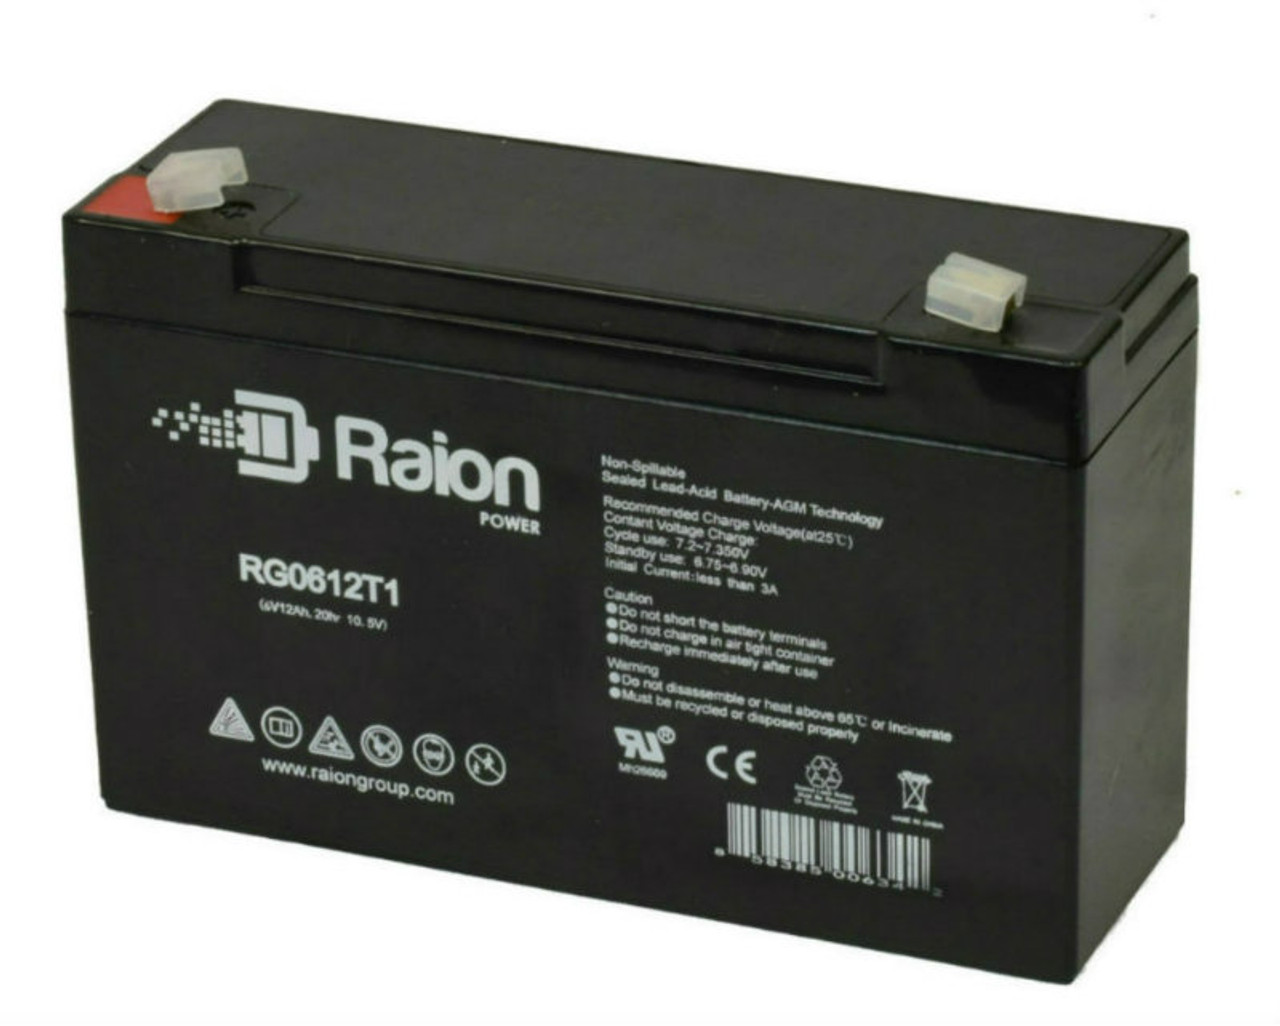 Raion Power RG06120T1 6V 12Ah Replacement UPS Battery Cartridge for HP 4629A